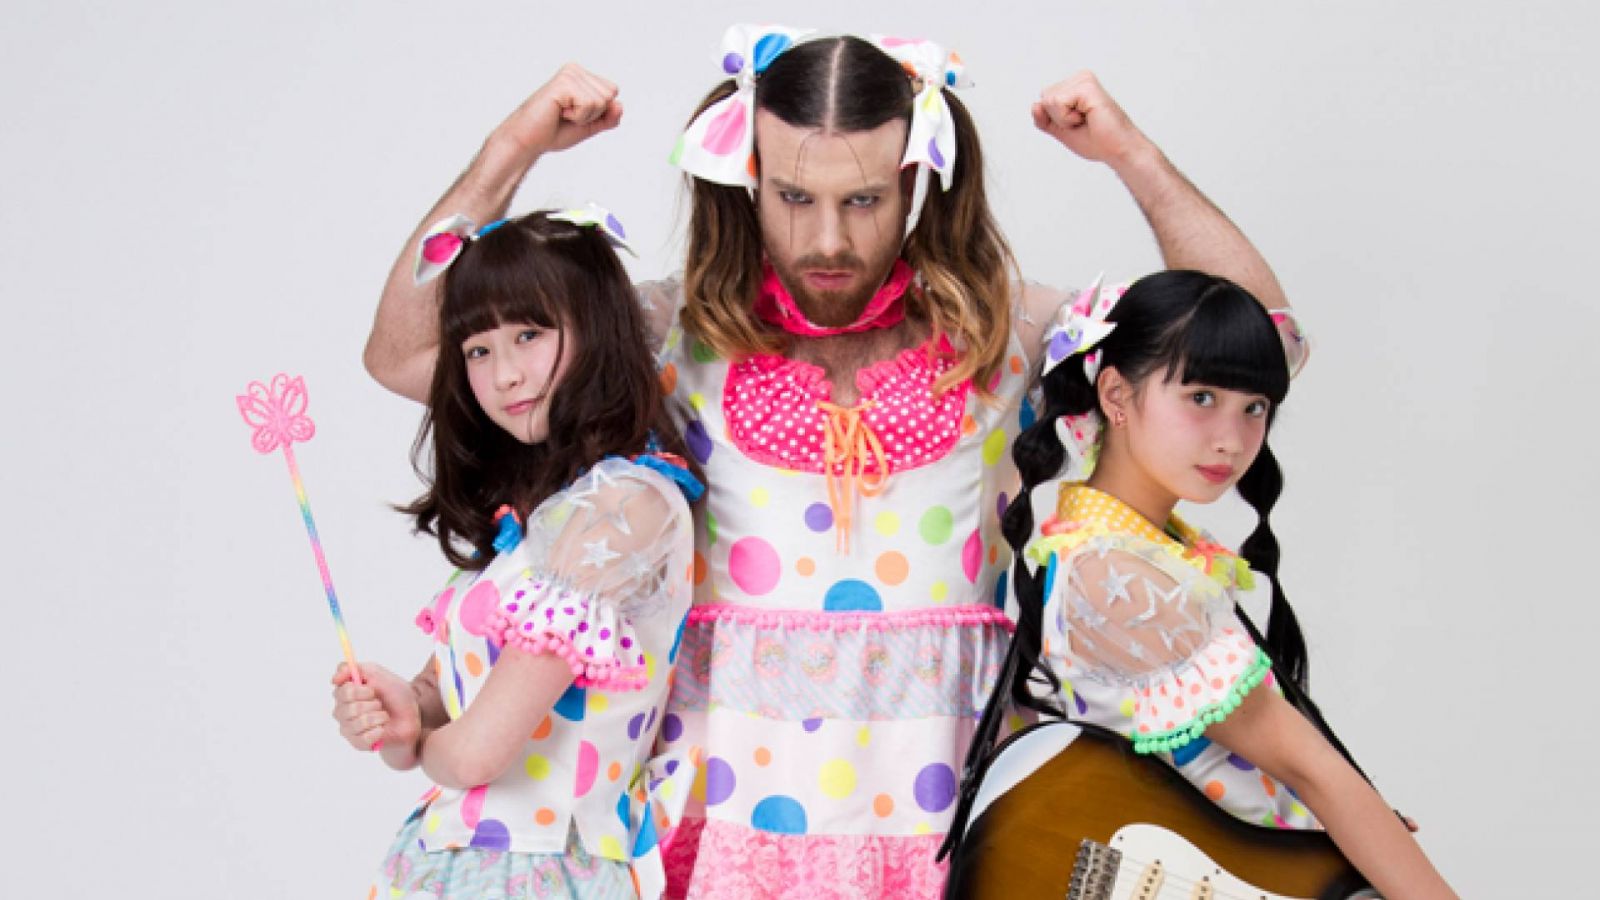 LADYBABY live in Köln © 2015 clearstone Co., Ltd. All rights reserved.